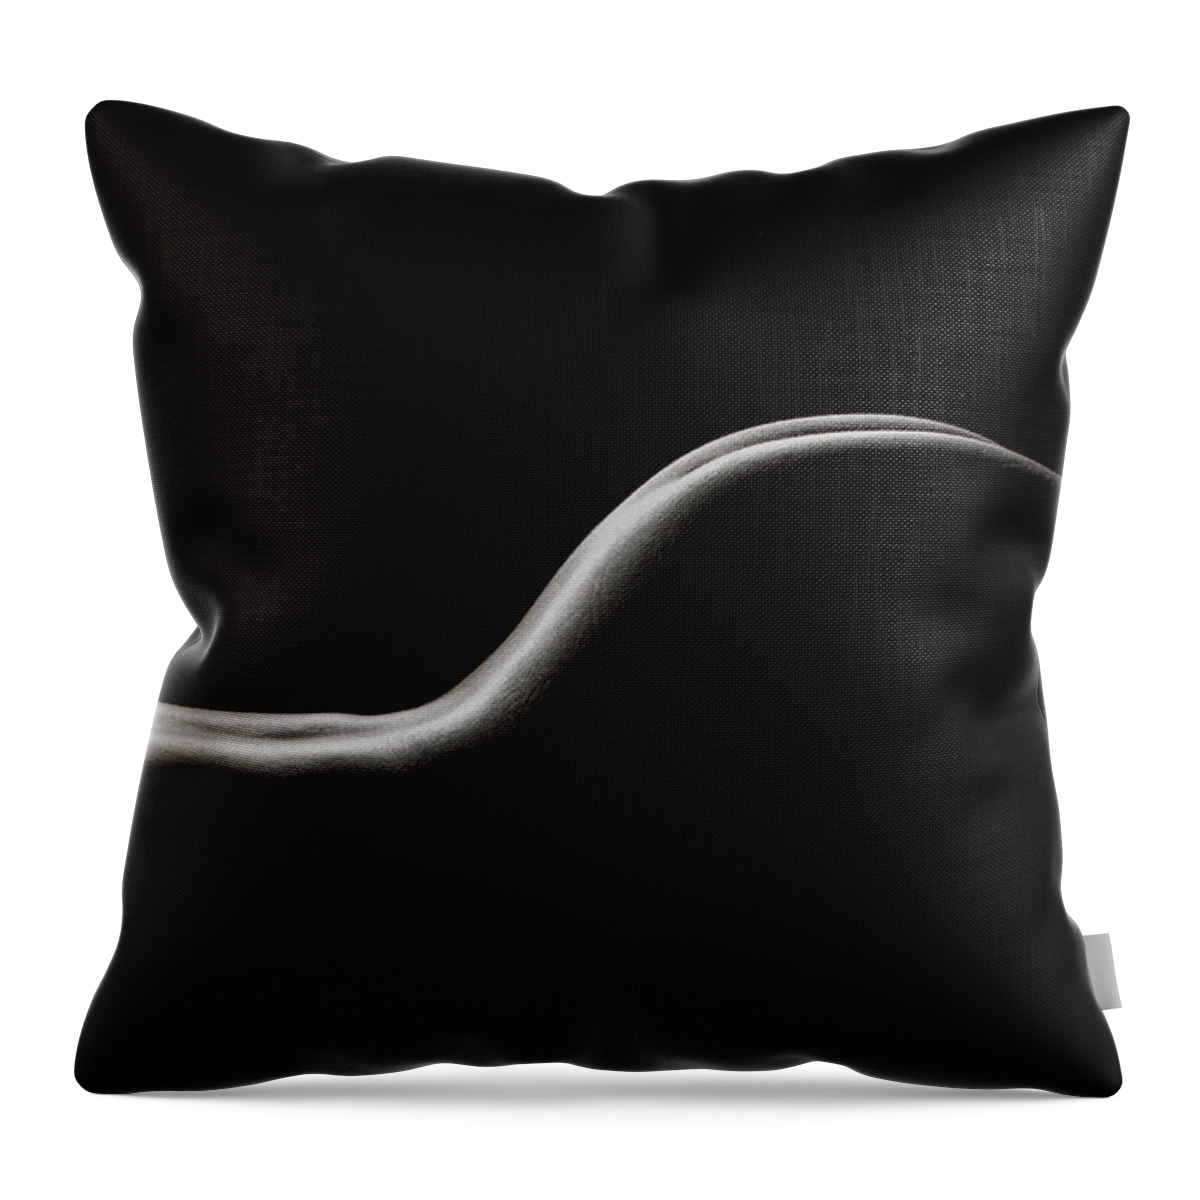 Nude Throw Pillow featuring the photograph Bodyscape 254 by Michael Fryd